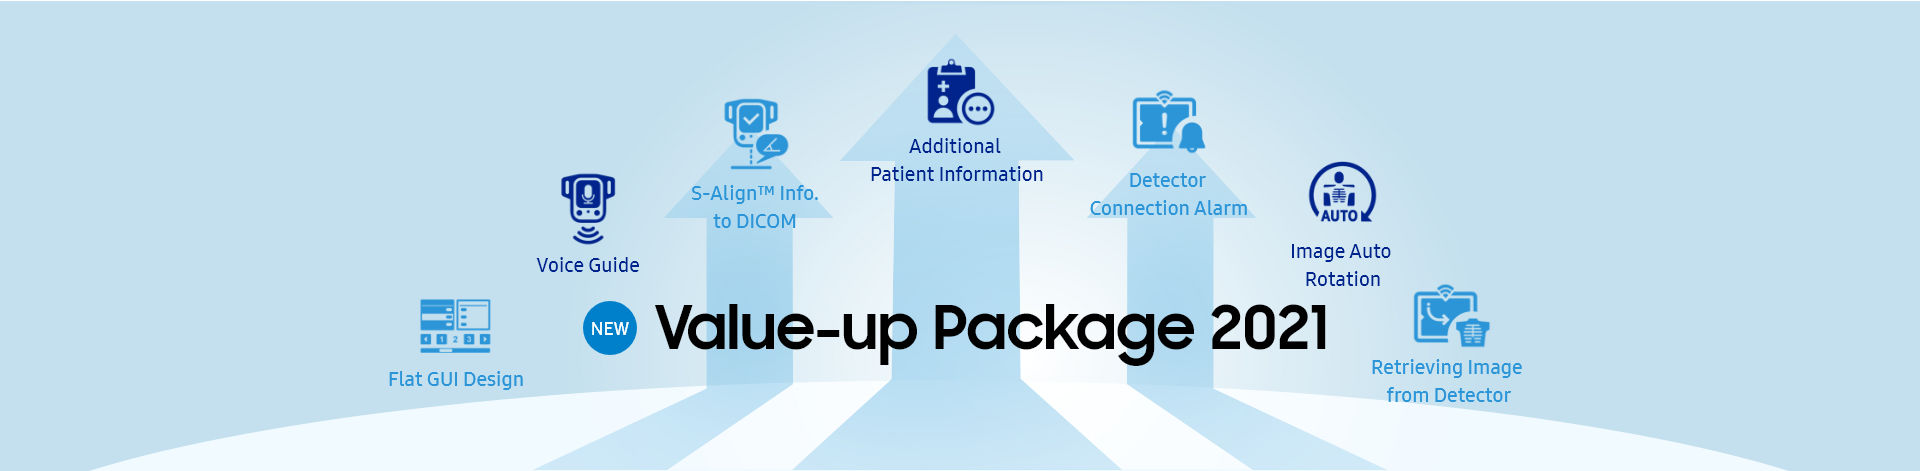 Valu-up Package 2021, Flat GUI Design, Voice Guide, S-Align info to DICOM, Additional Patien Information, Detector Connection Alarm, Image Auto Rotation, Retrievin Image from Detector